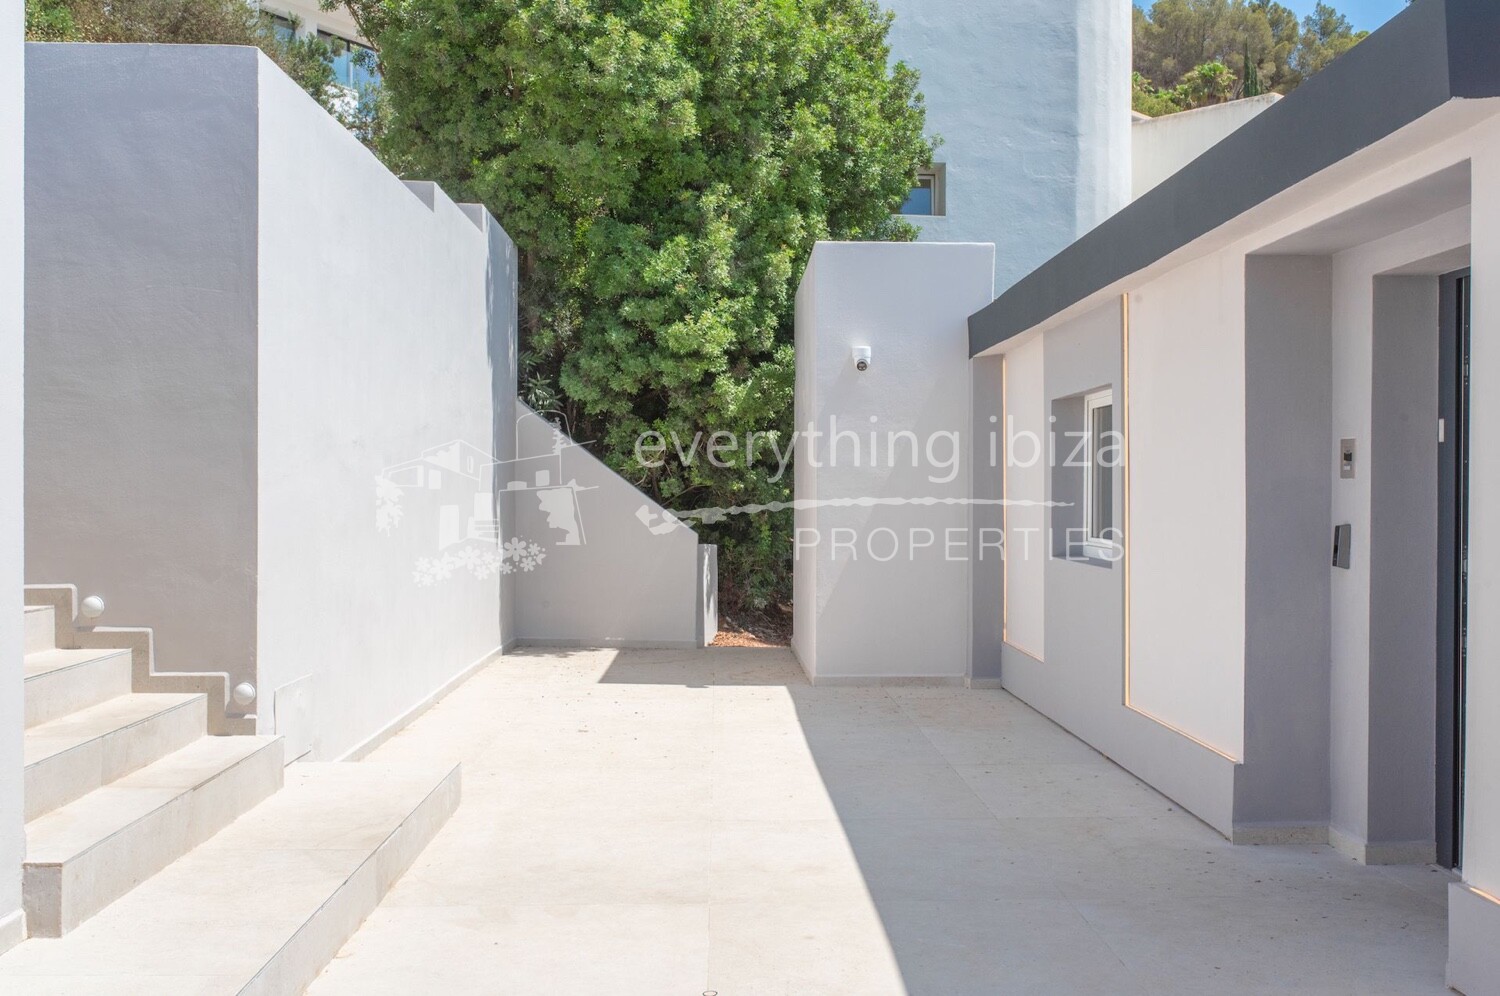 Newly Built Detached Villa of the Finest Quality with Tourist License, ref. 1627, for sale in Ibiza by everything ibiza Properties